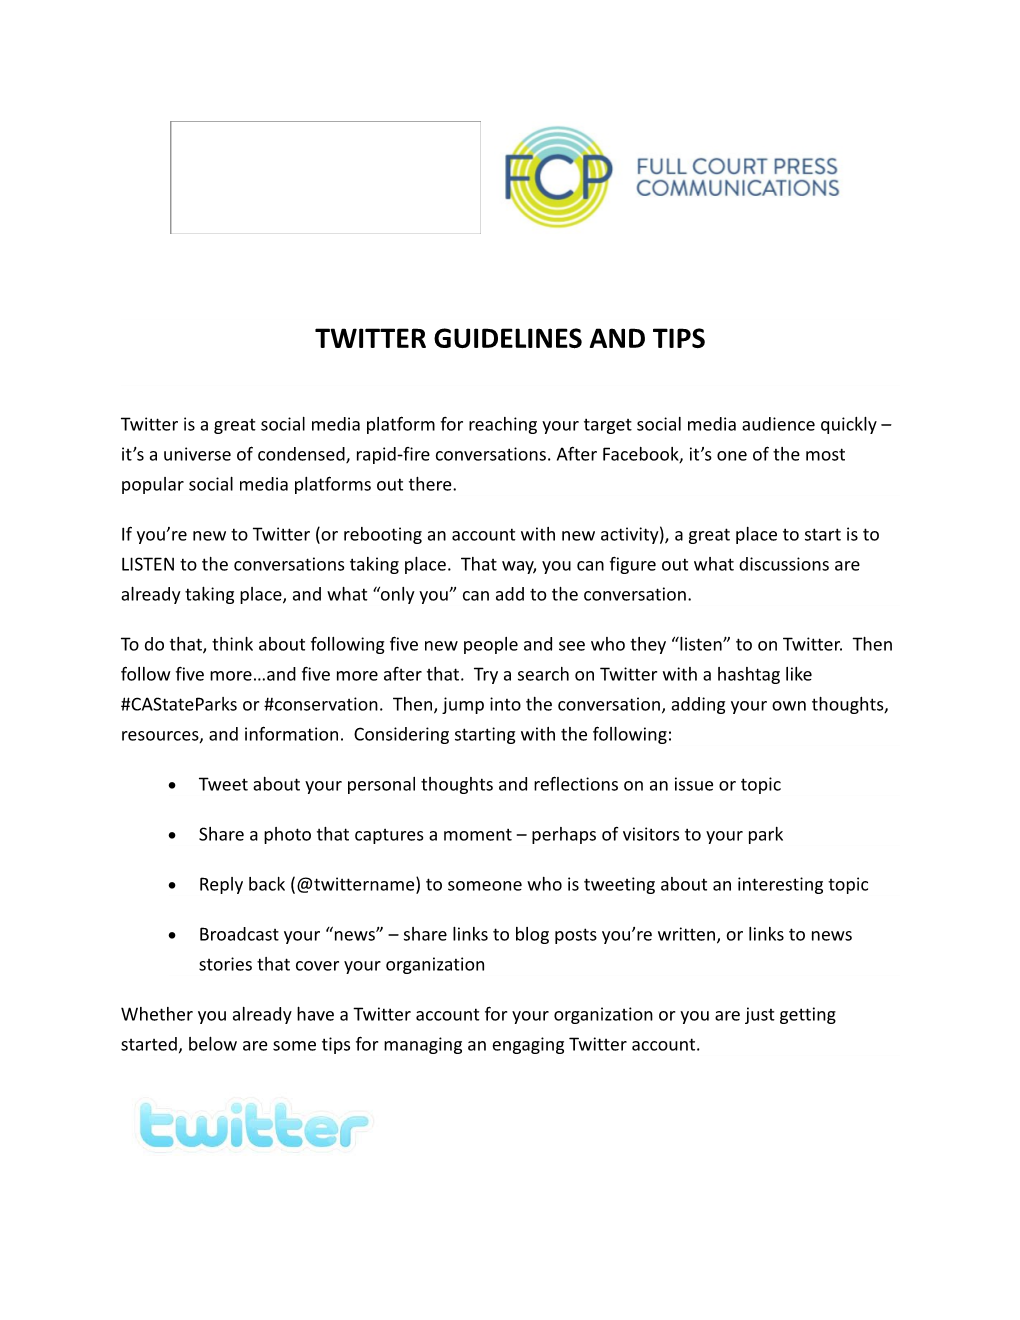 Twitter Guidelines and Tips